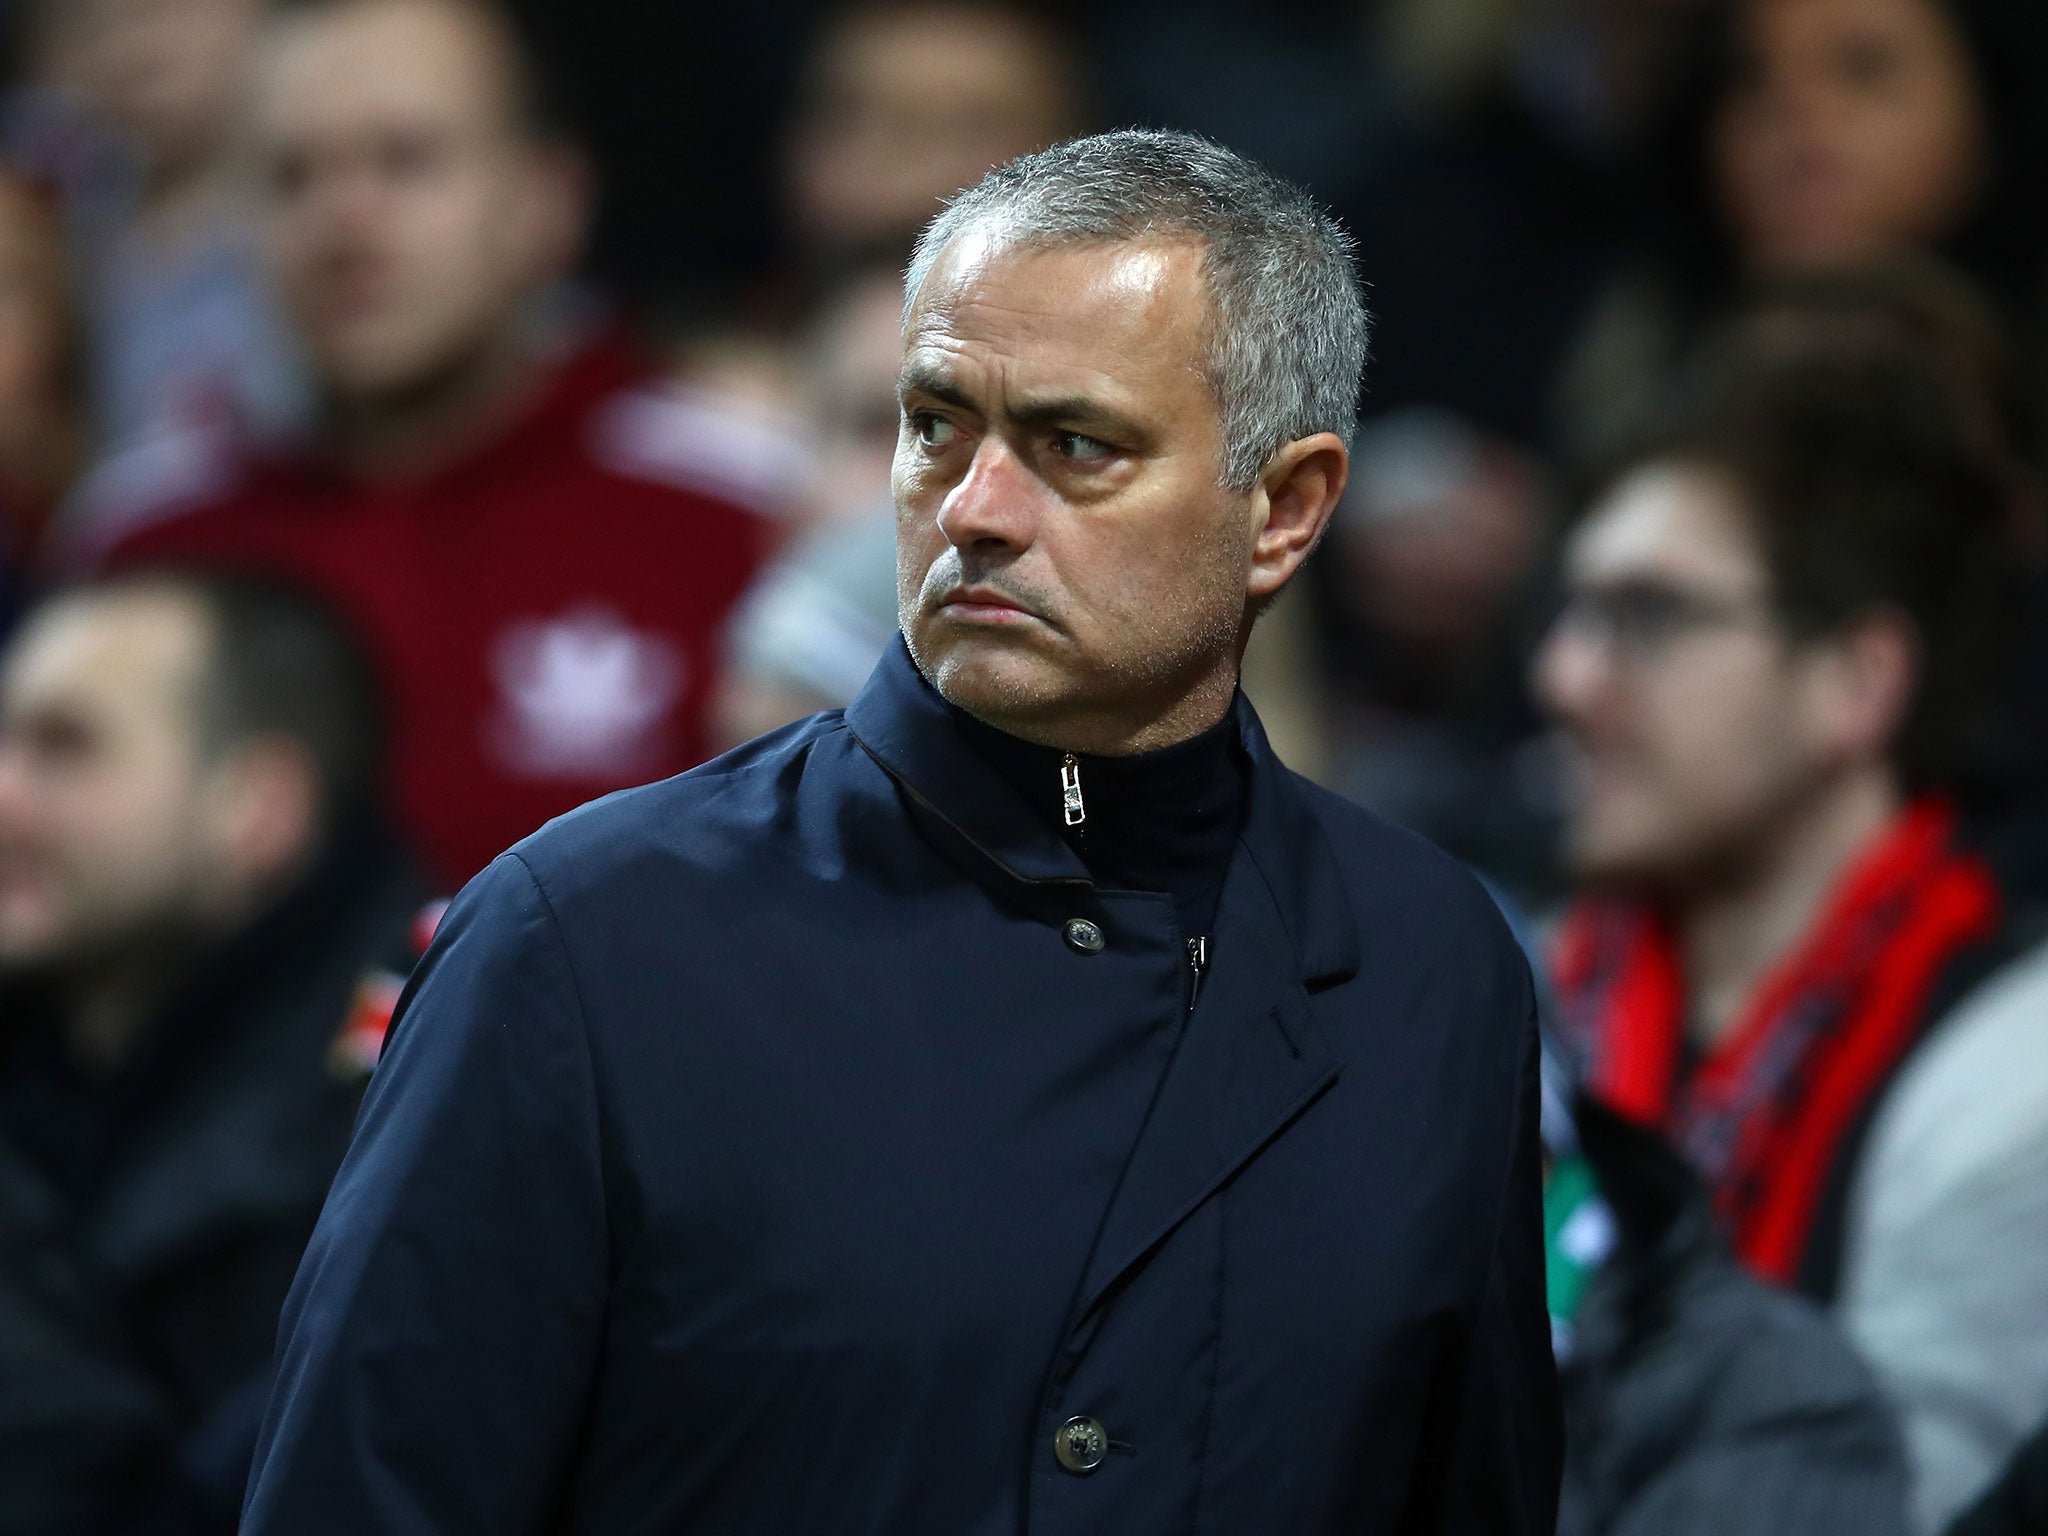 Mourinho wasn't best placed, despite his side's 3-0 victory